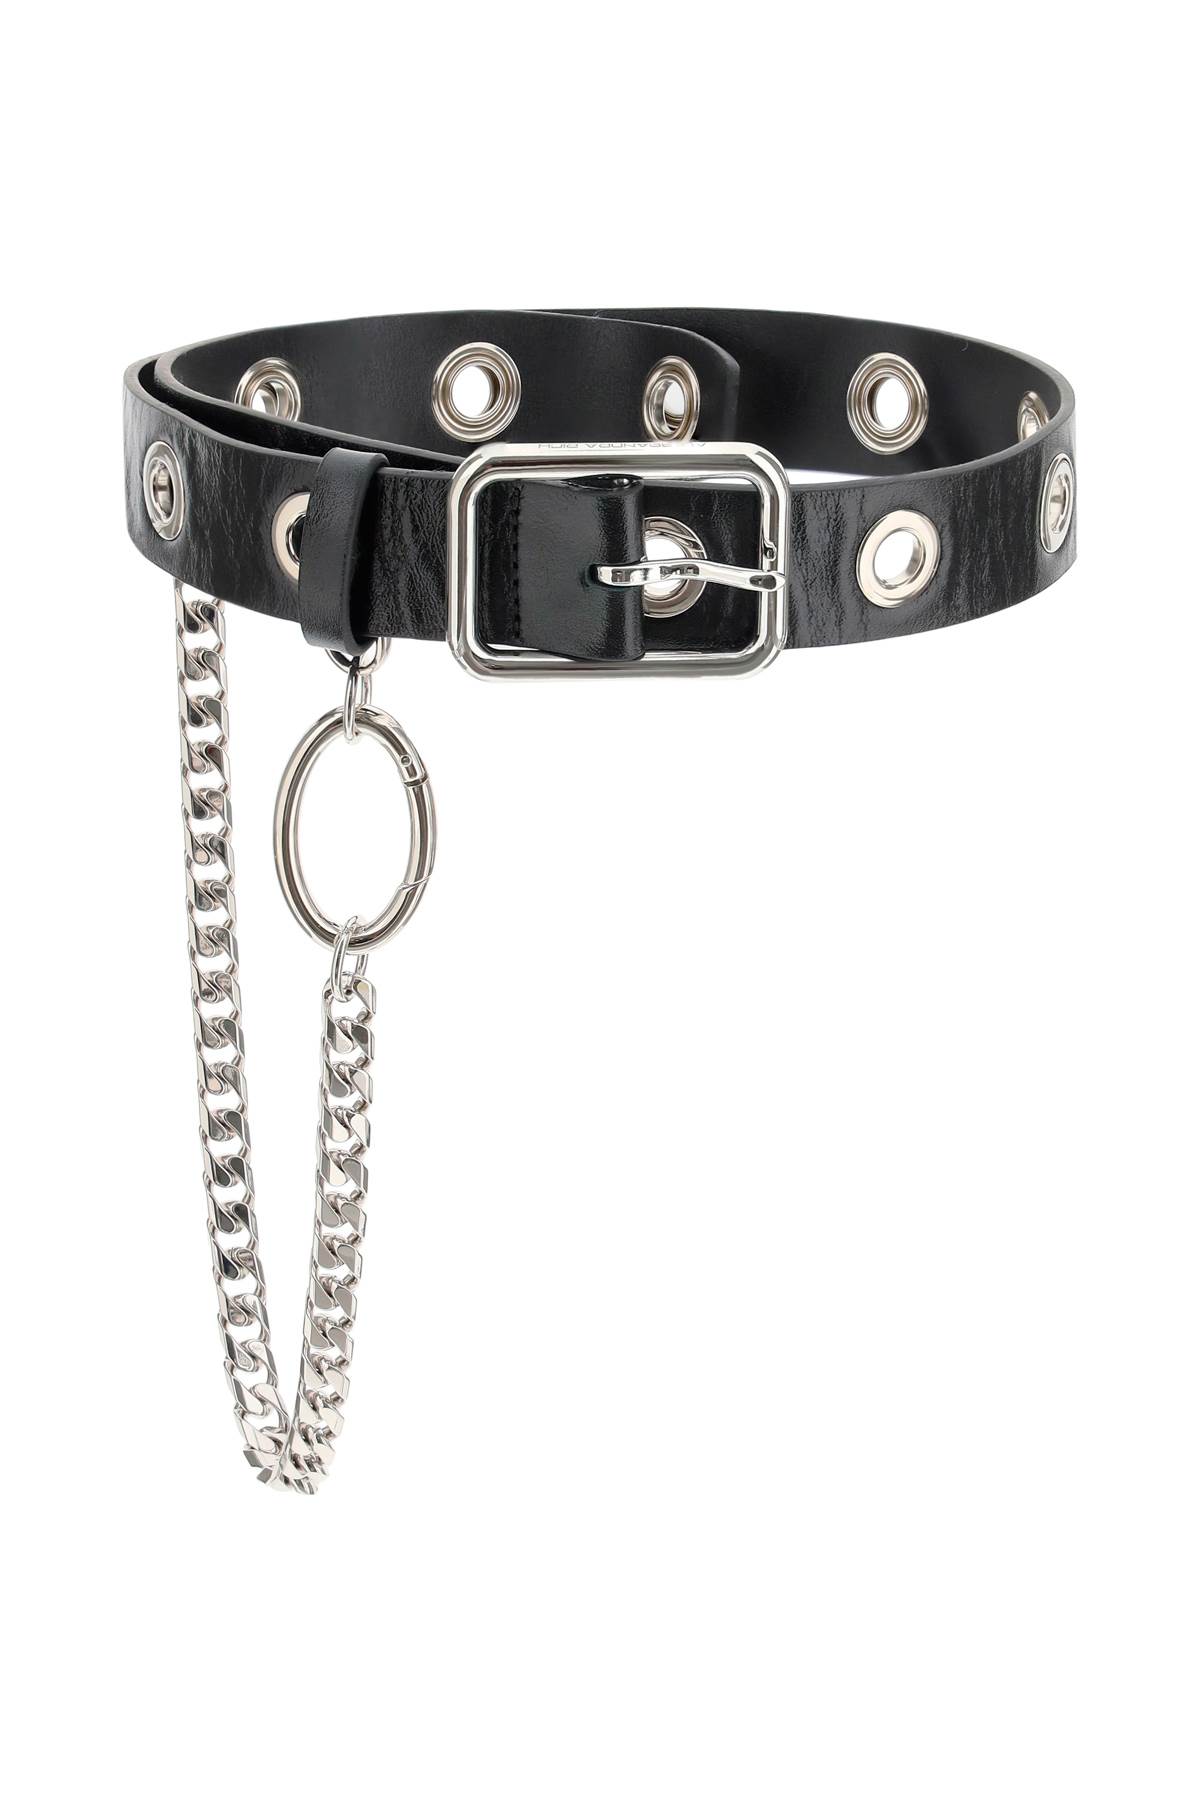 Alessandra Rich Belt With Chain